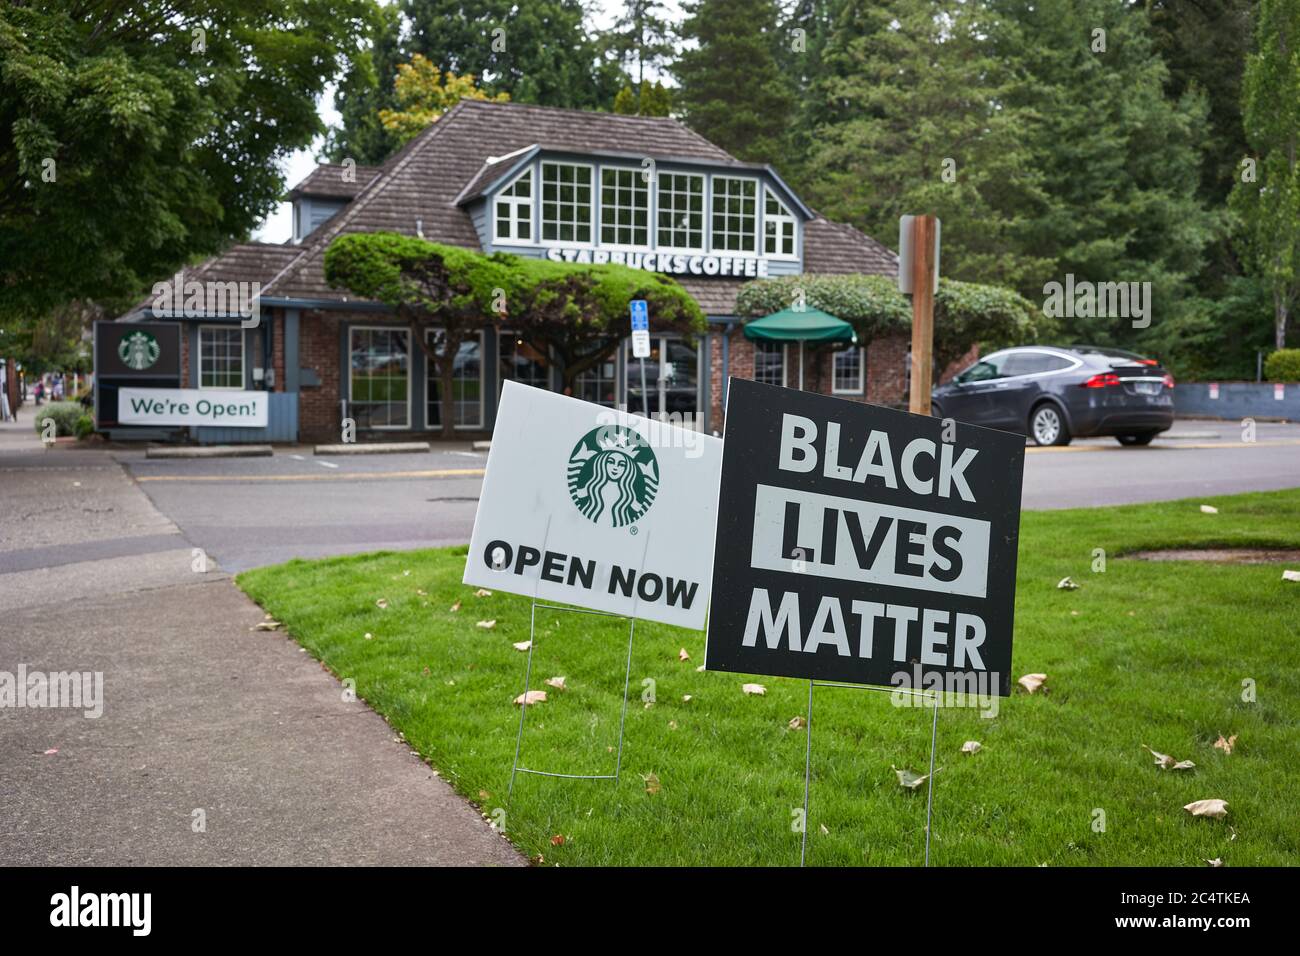 A Black Lives Matter sign is seen outside a Starbucks coffee shop in Lake Oswego, Oregon, on Saturday, June 27, 2020. Stock Photo